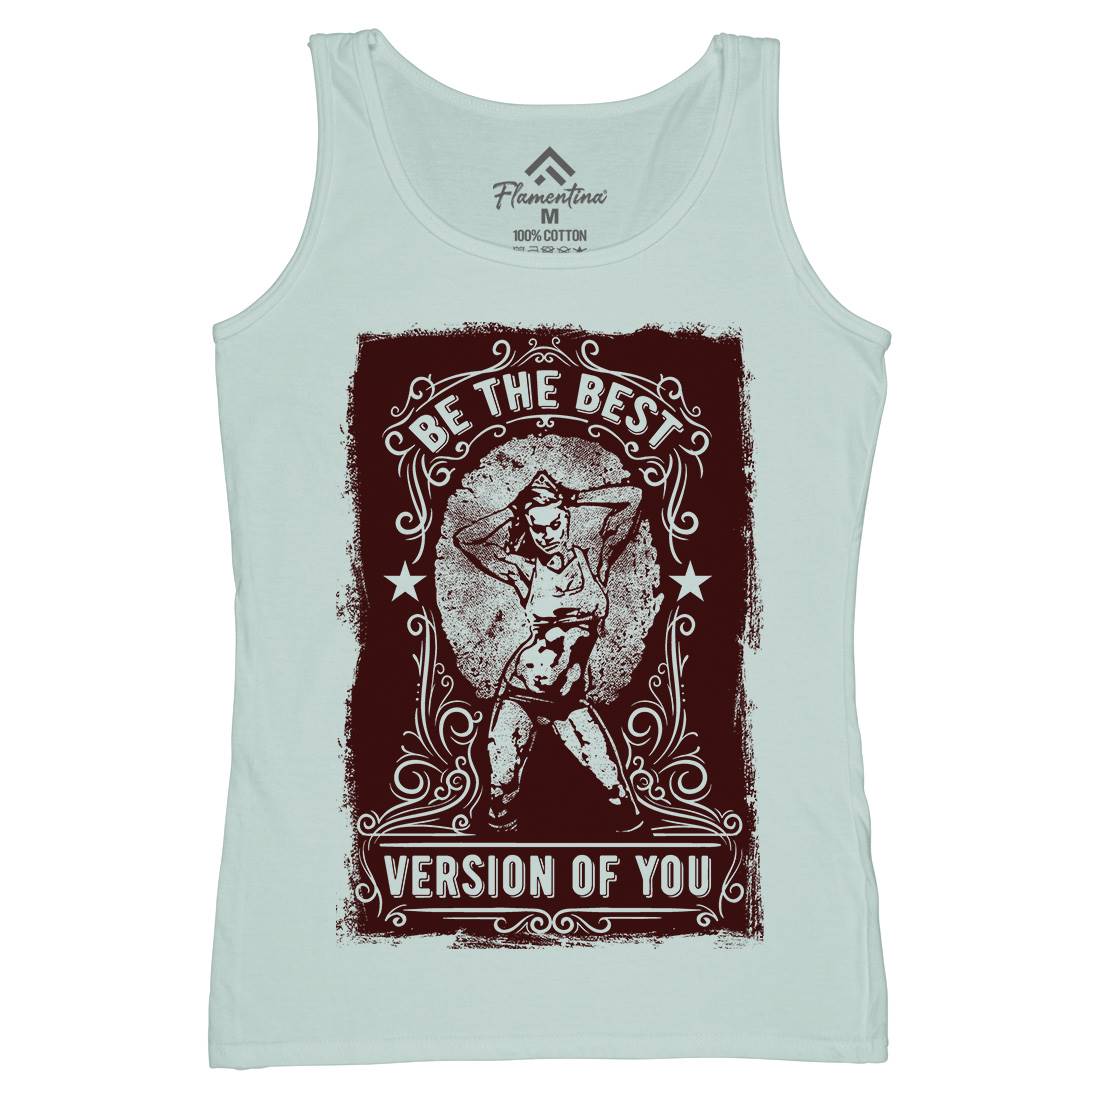 The Best Version Of You Womens Organic Tank Top Vest Gym C984